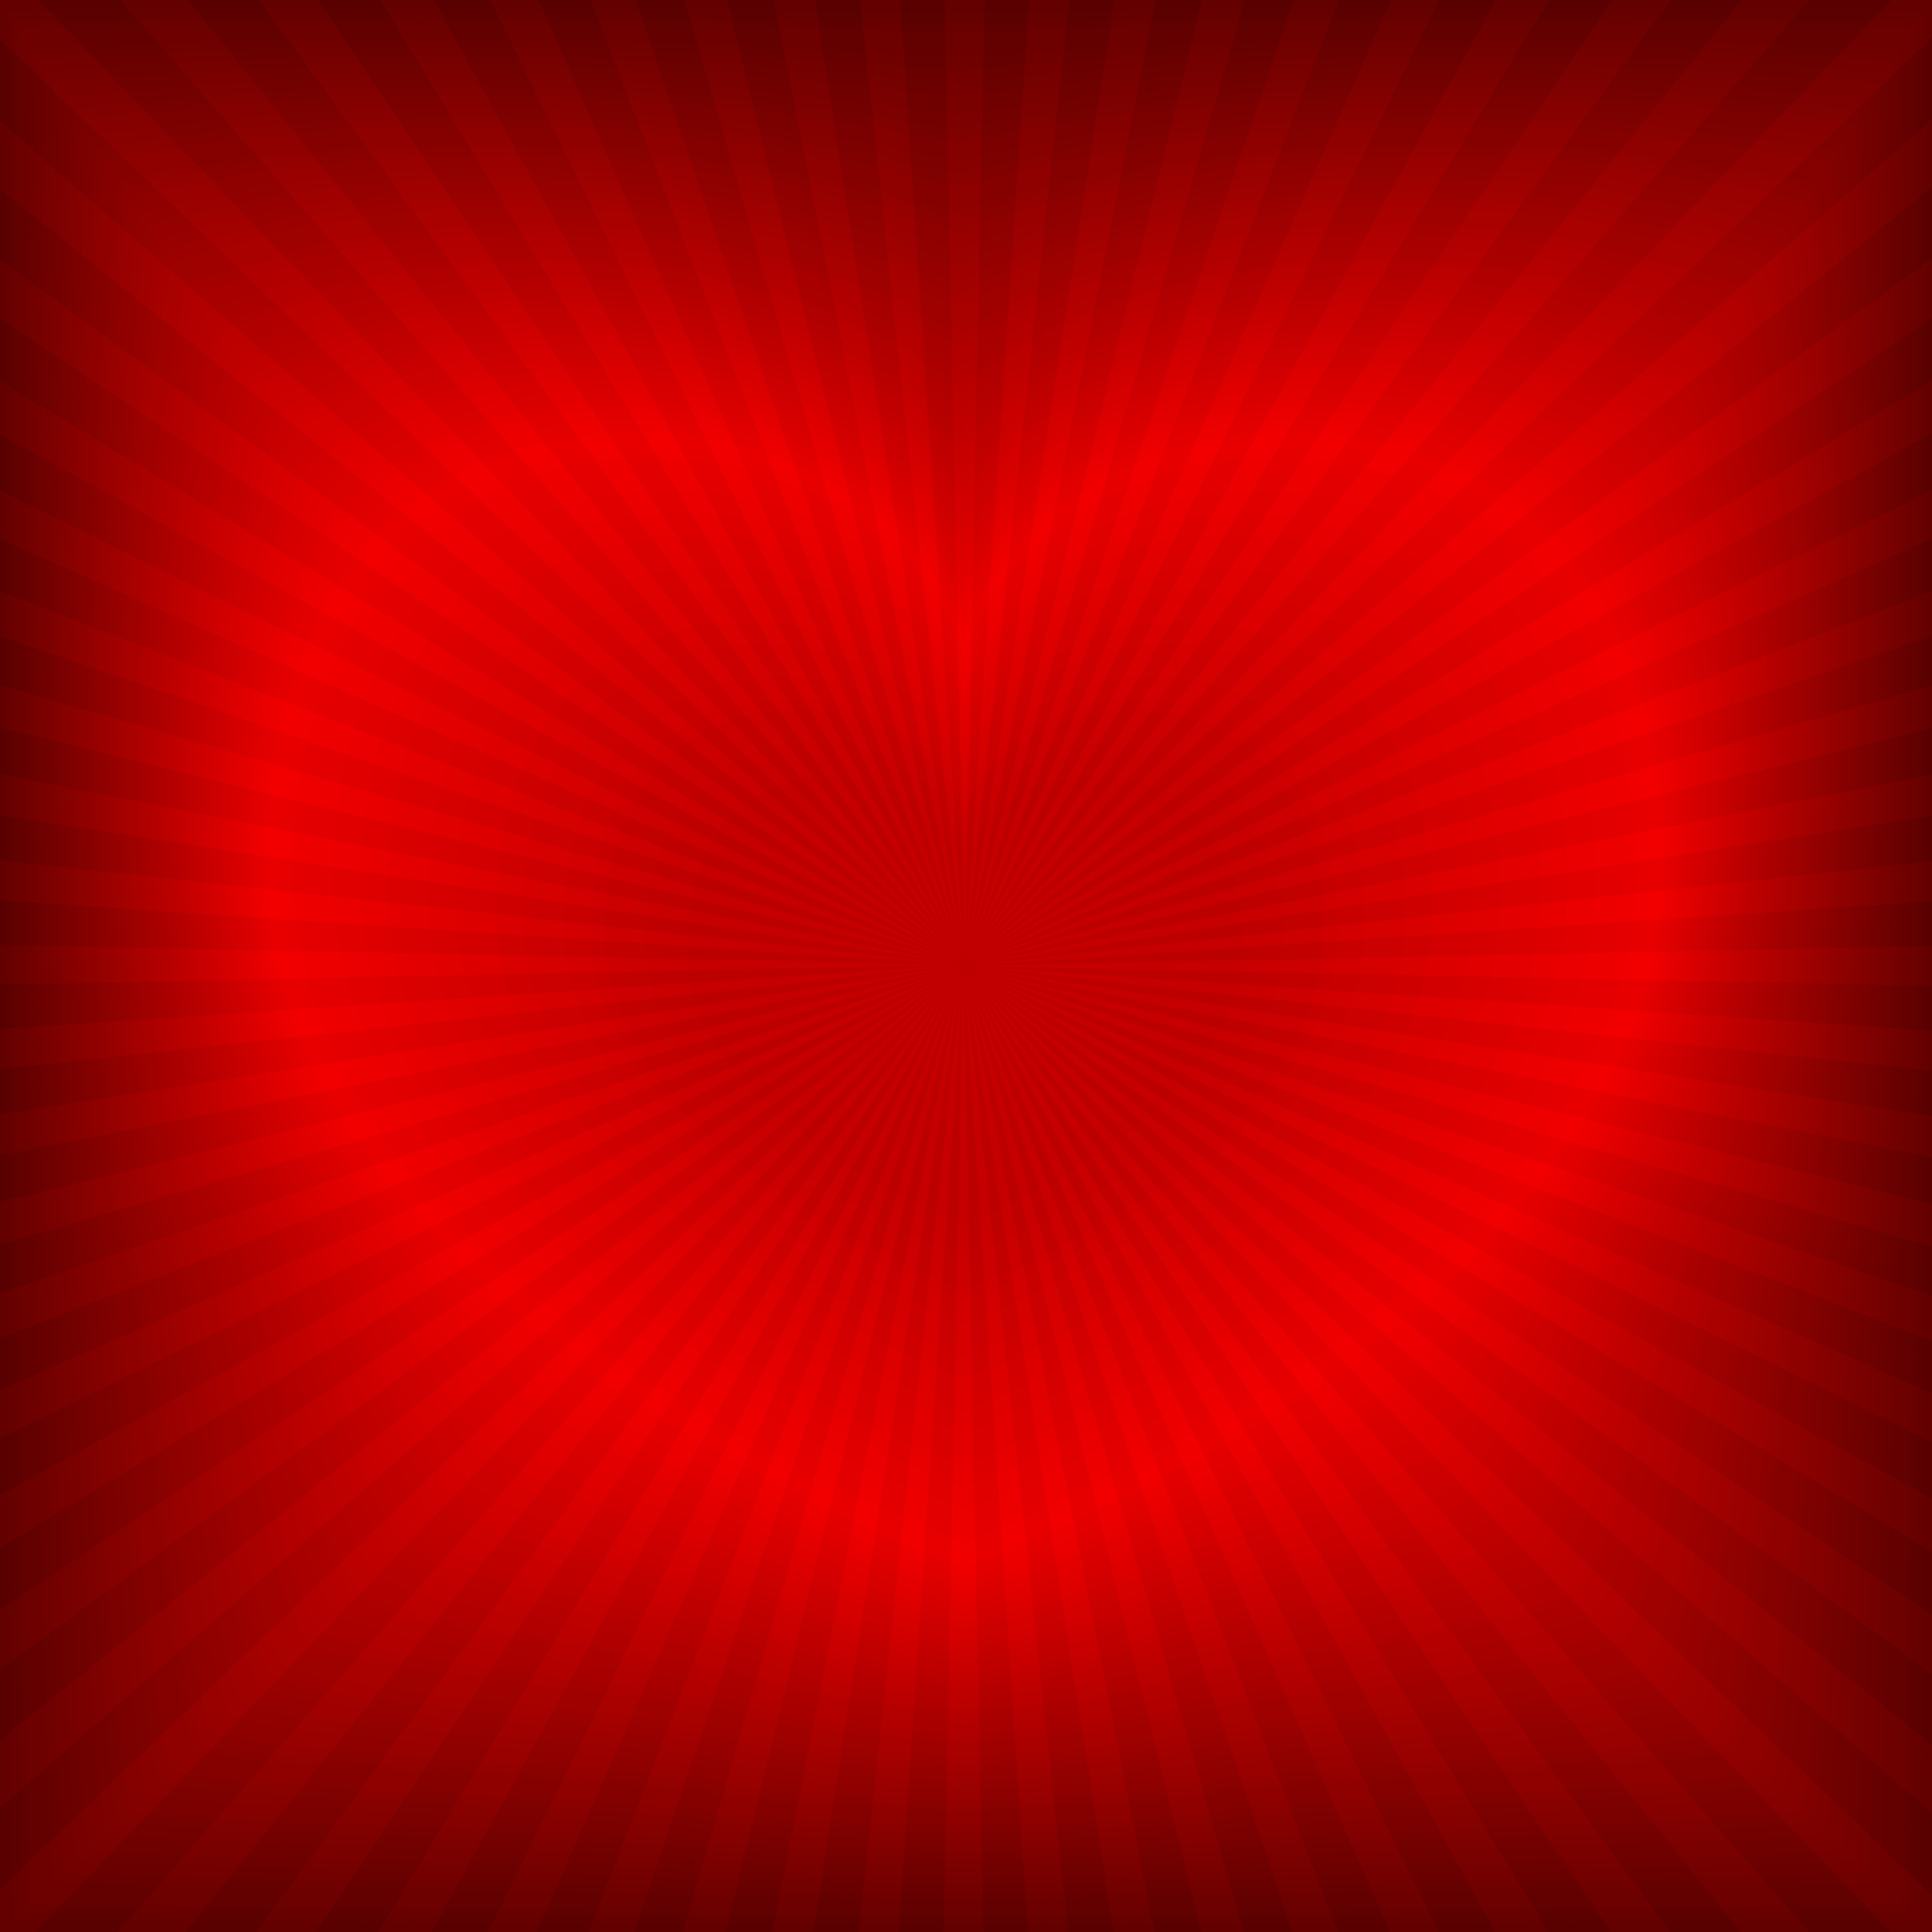 Red Heart Background Gallery Yopriceville High Quality